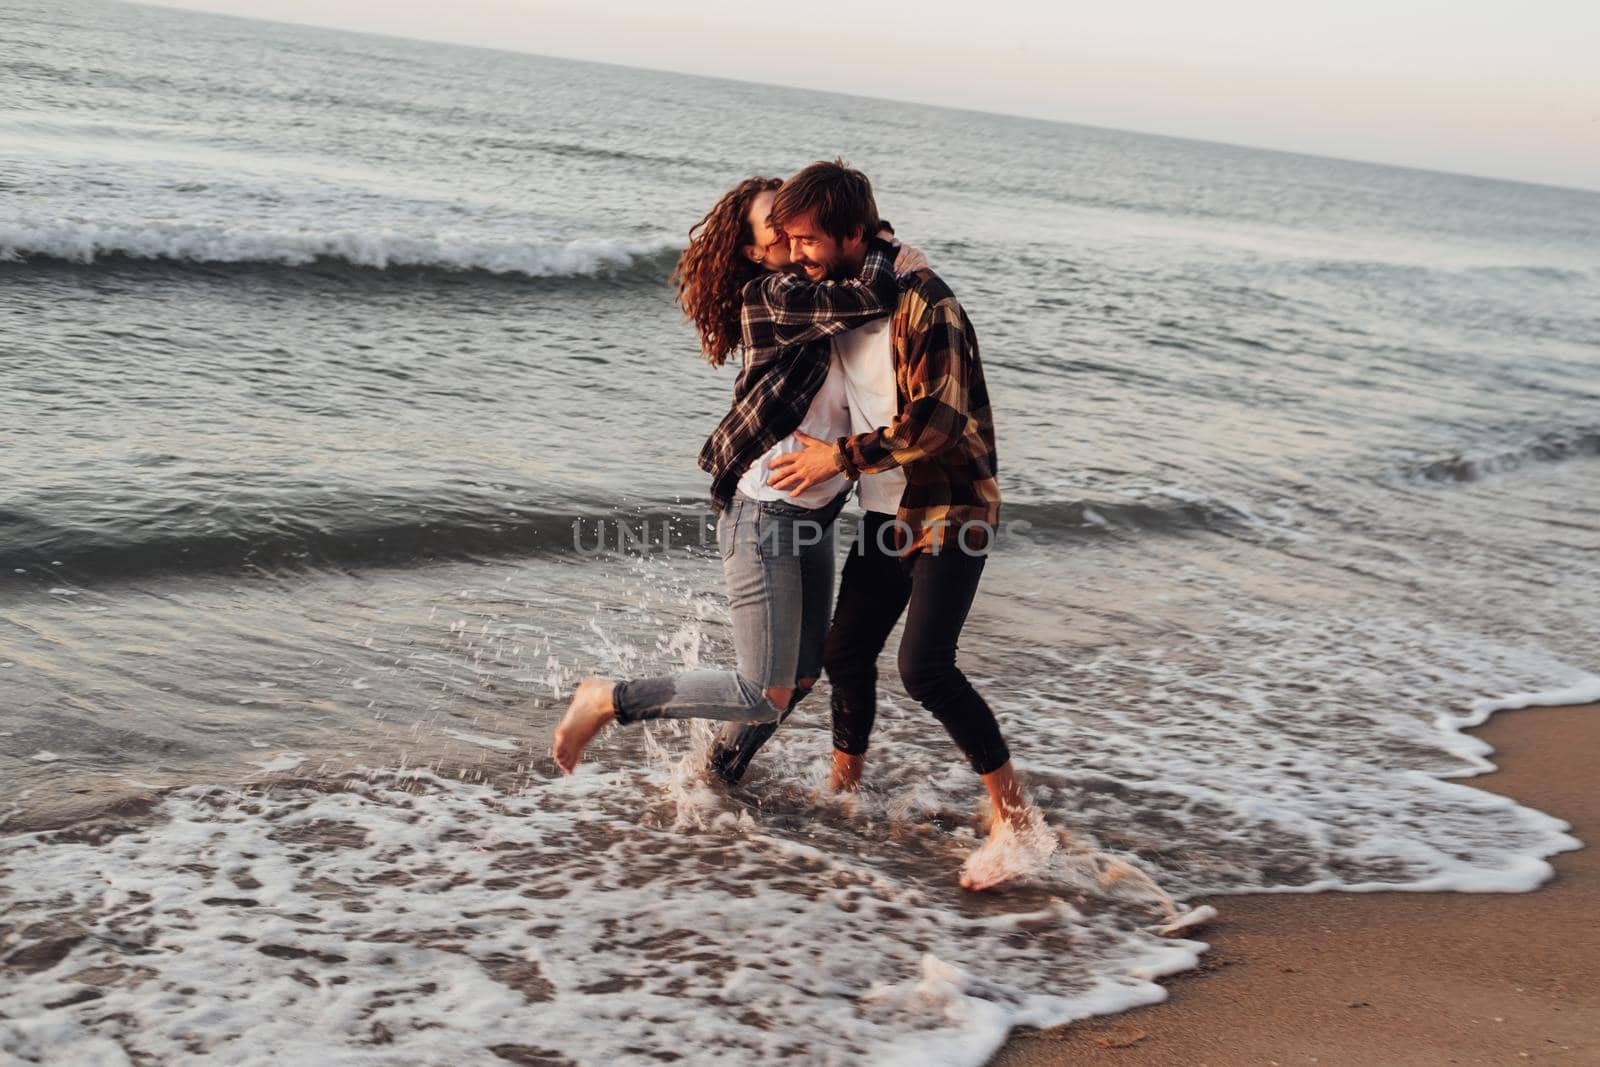 Young woman and man hugging and kissing together while standing on seashore at dawn